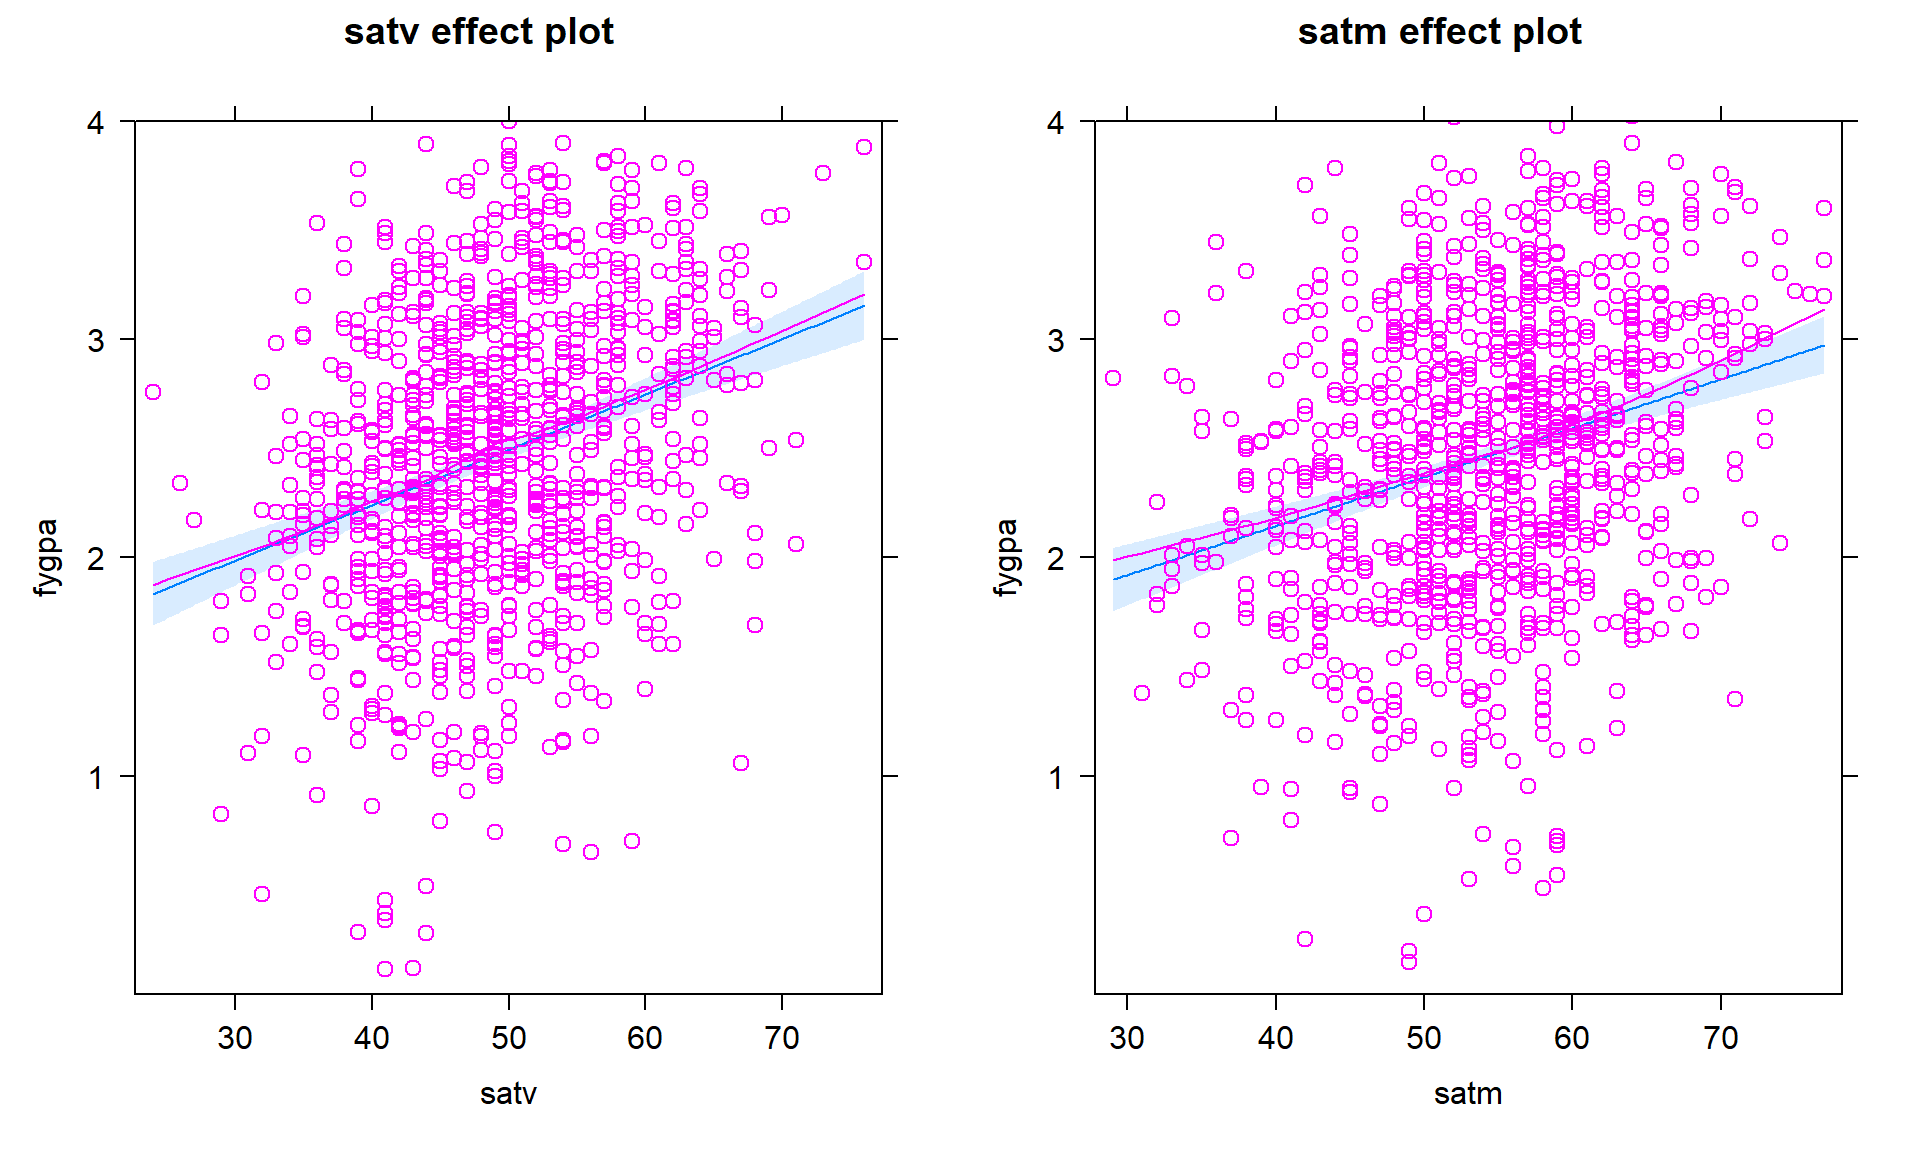 Term-plots for the \(\text{fygpa}\sim\text{satv} + \text{satm}\) model with partial residuals.